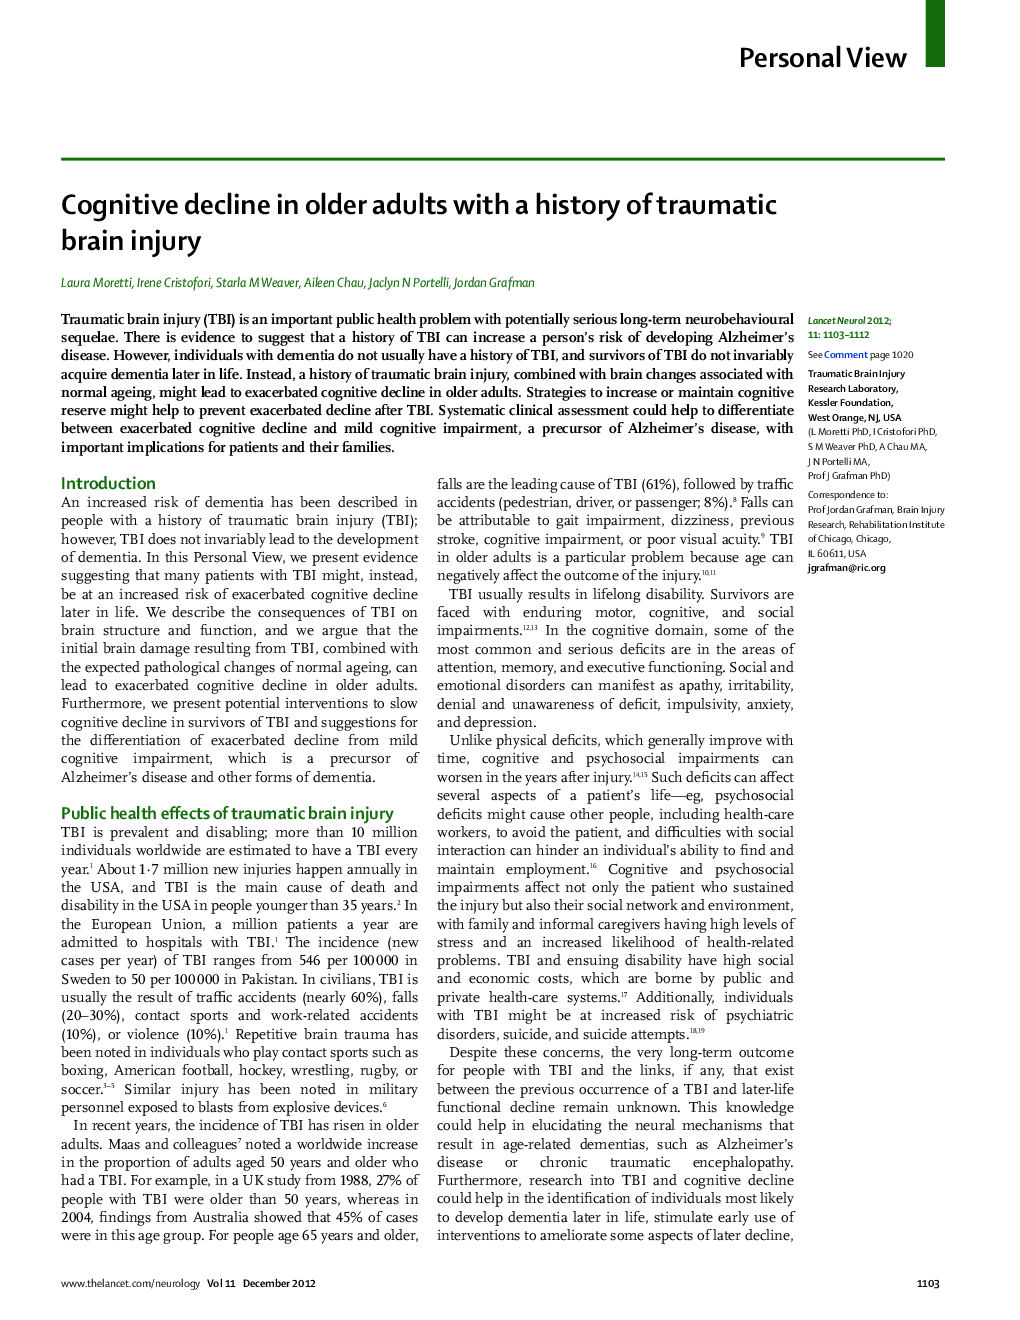 Cognitive decline in older adults with a history of traumatic brain injury